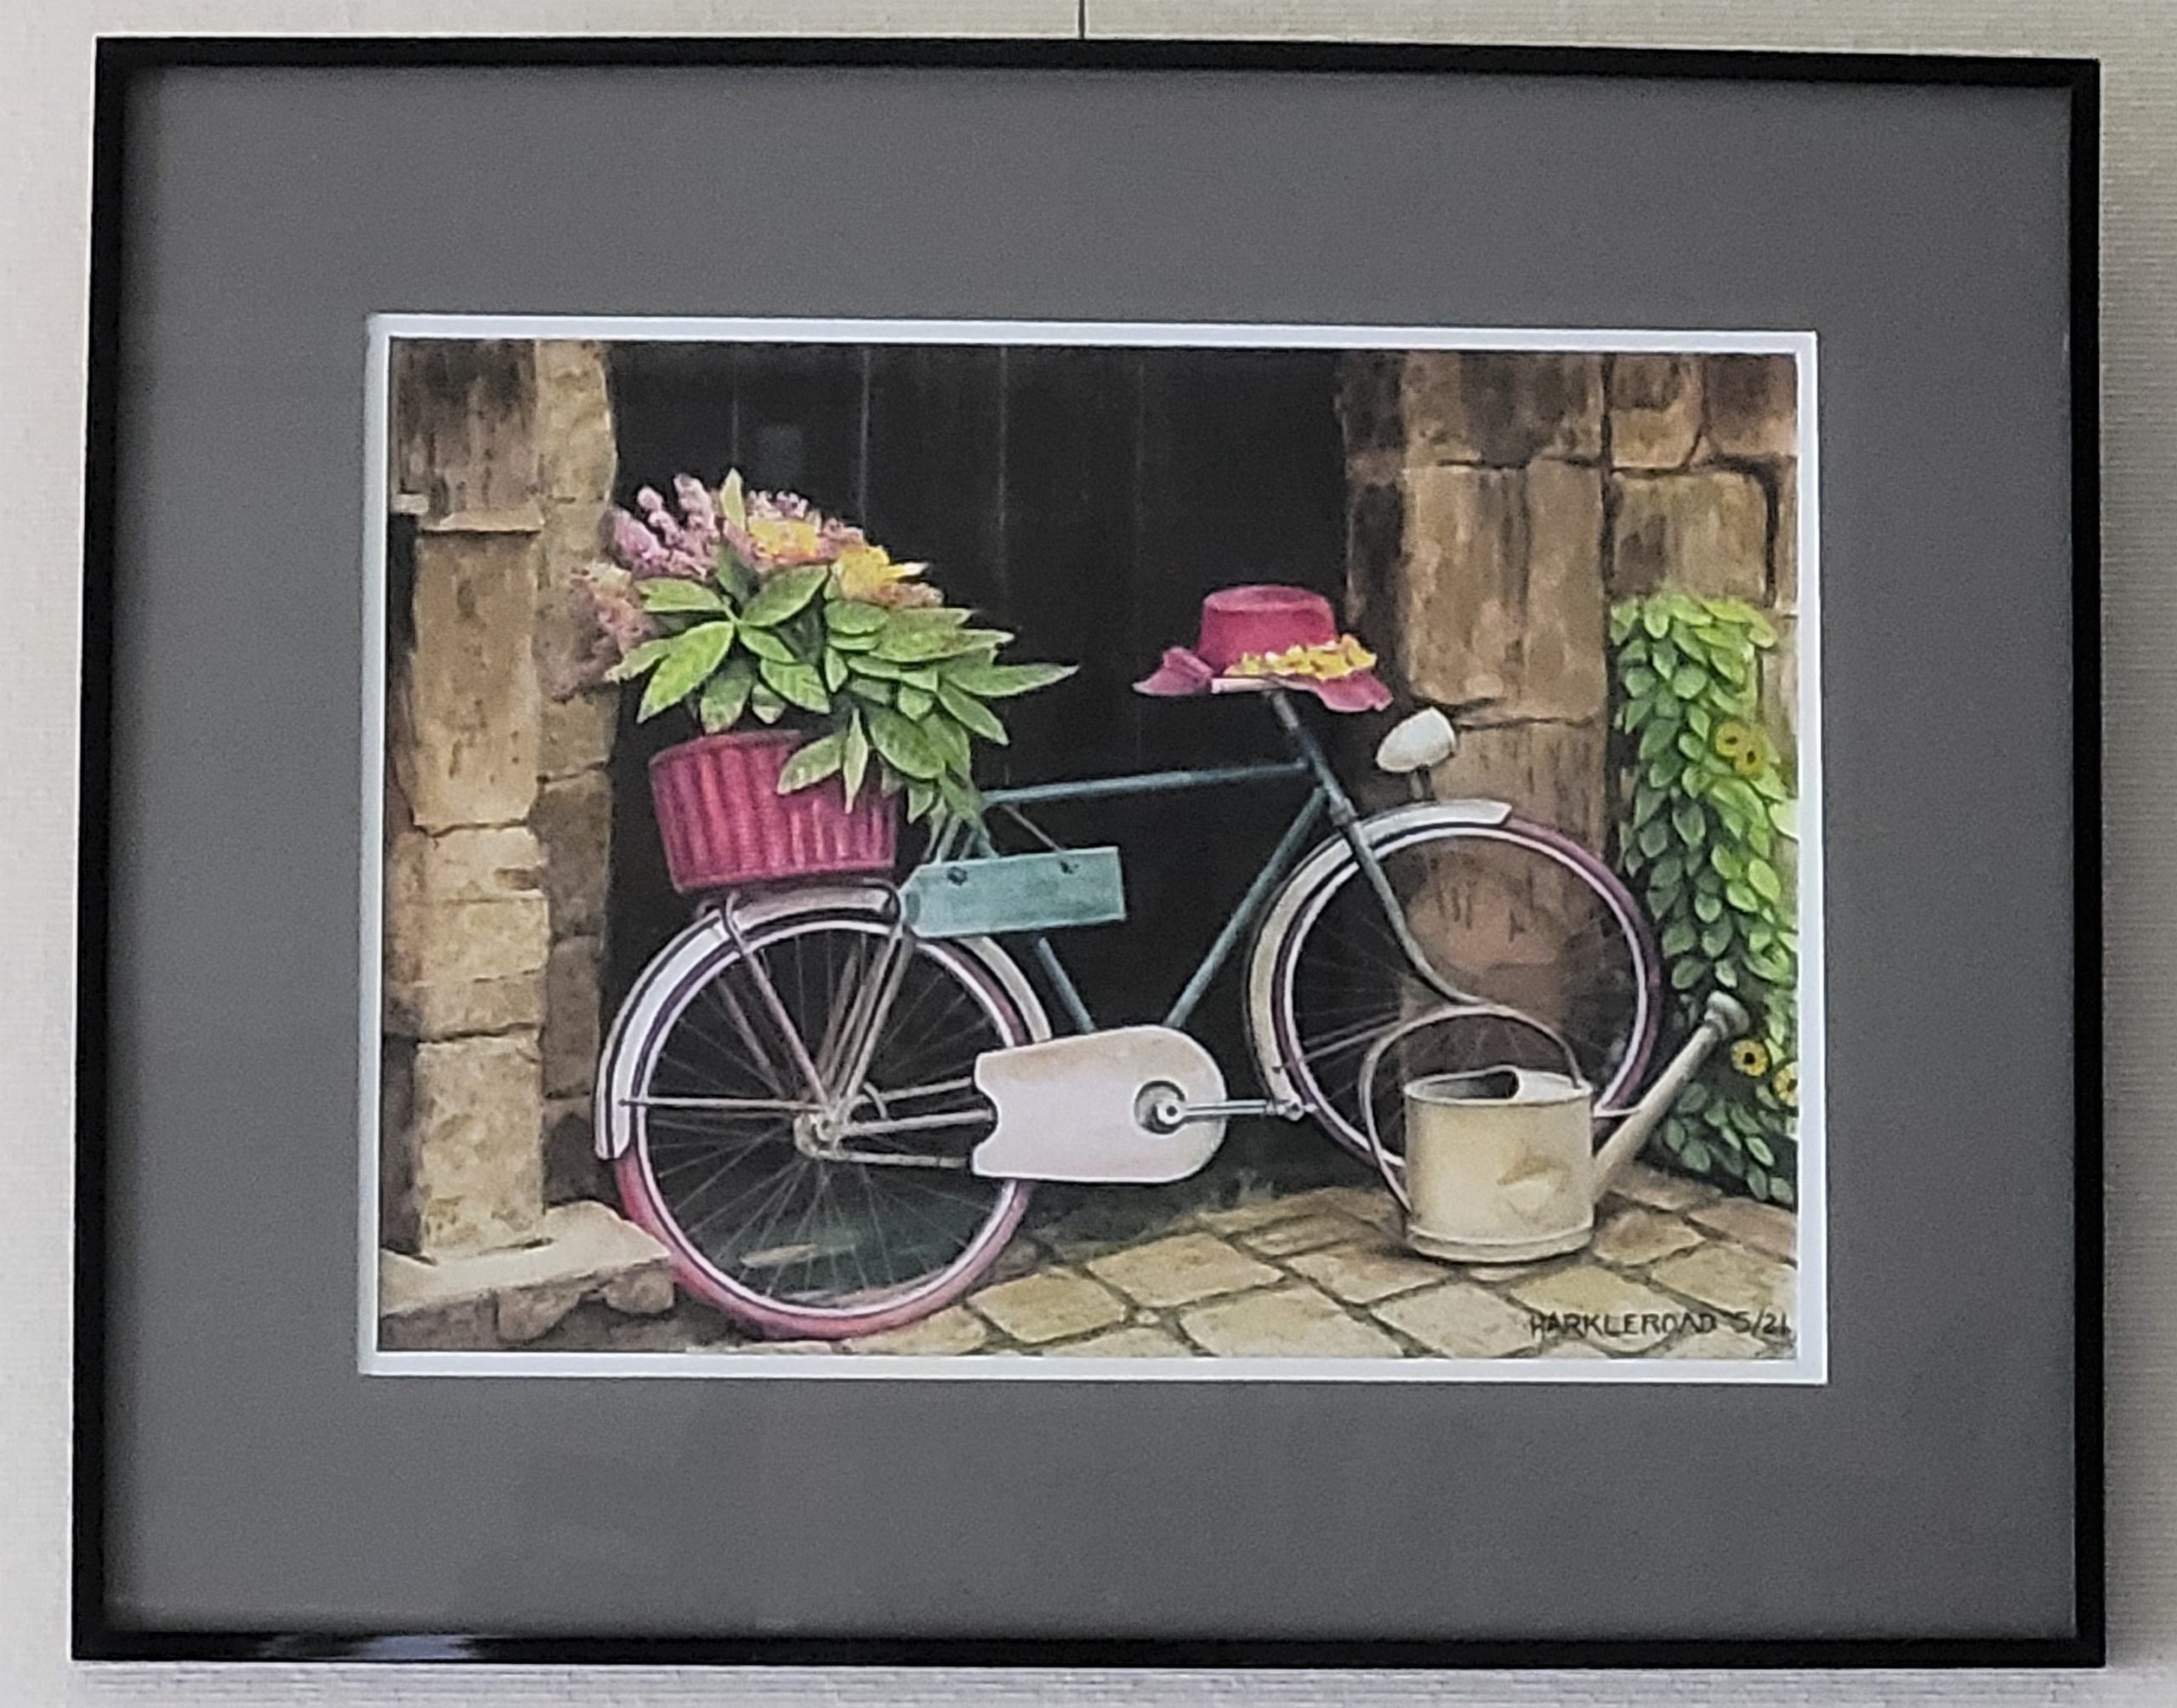 Tim H Bicycle Art work for Silent auction